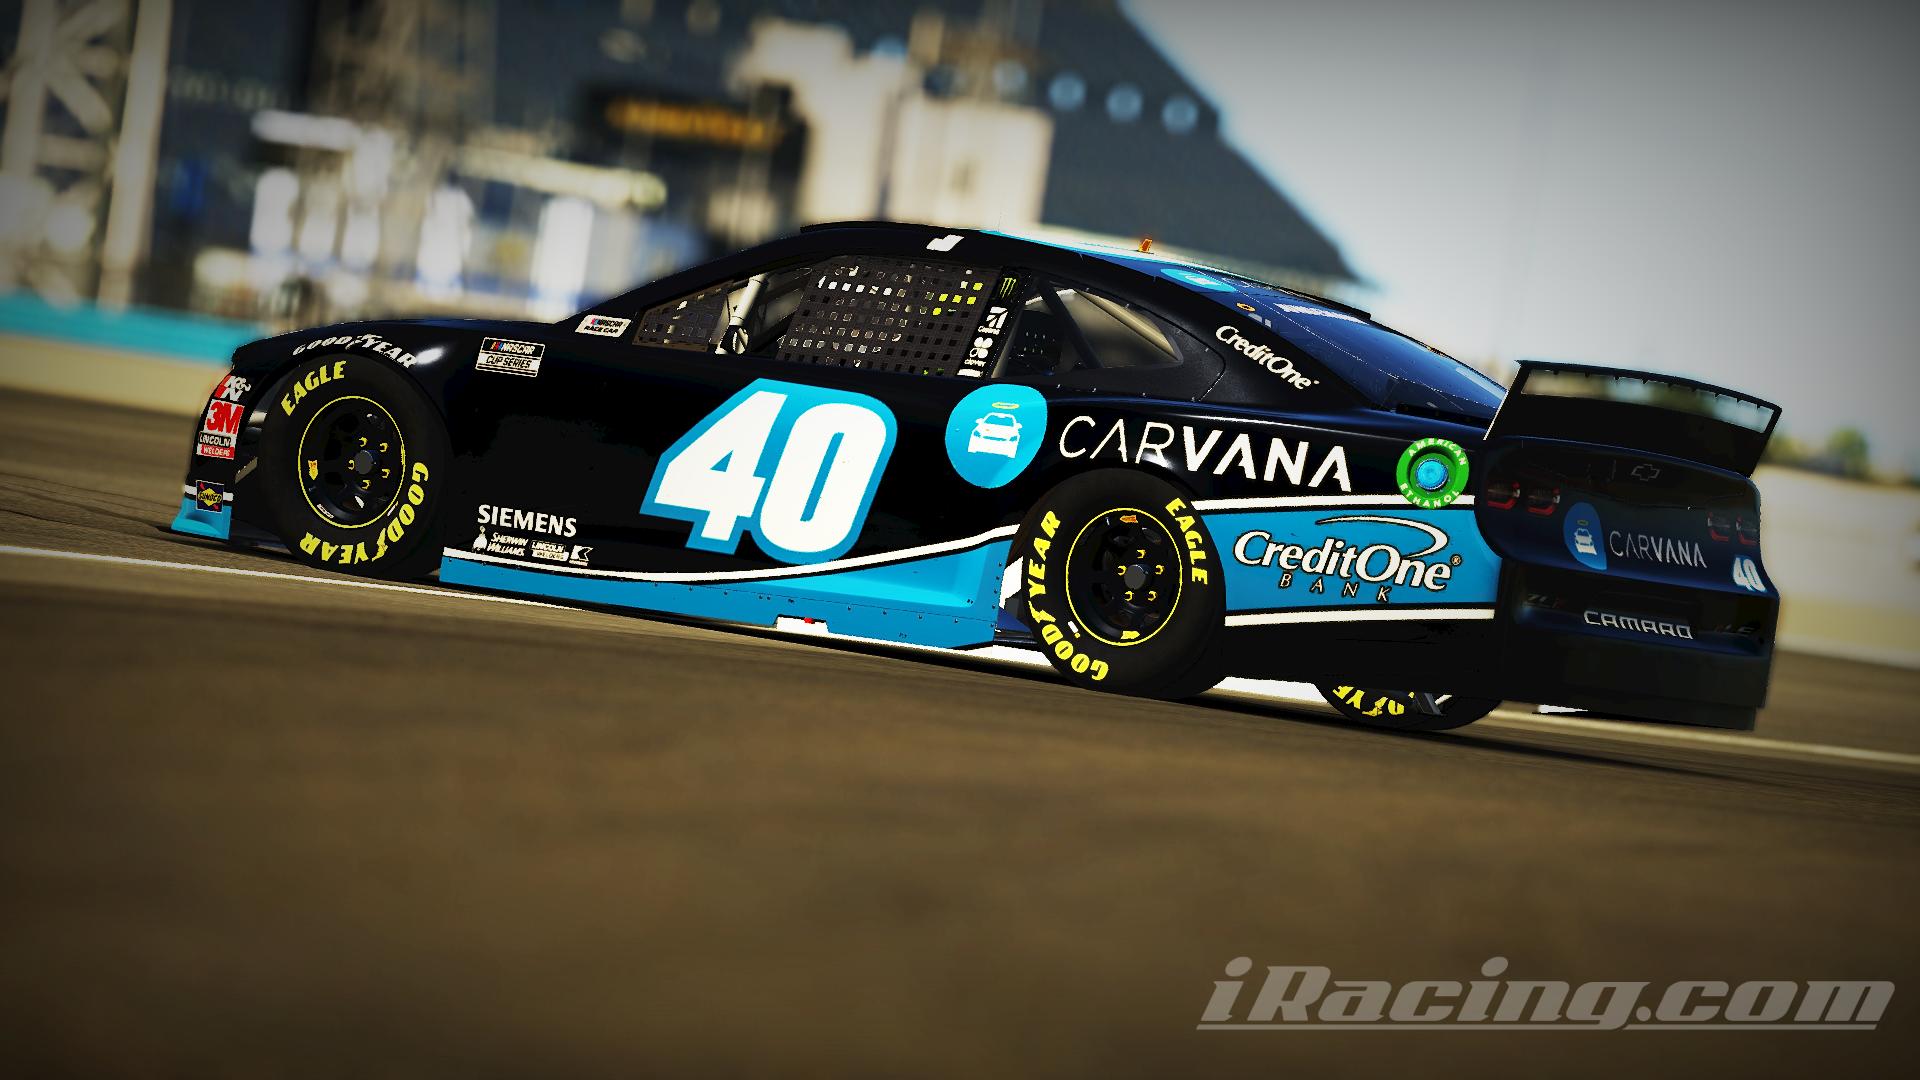 #40 Jimmie Johnson 2021 Carvana Concept by James Jungemann - Trading Paints